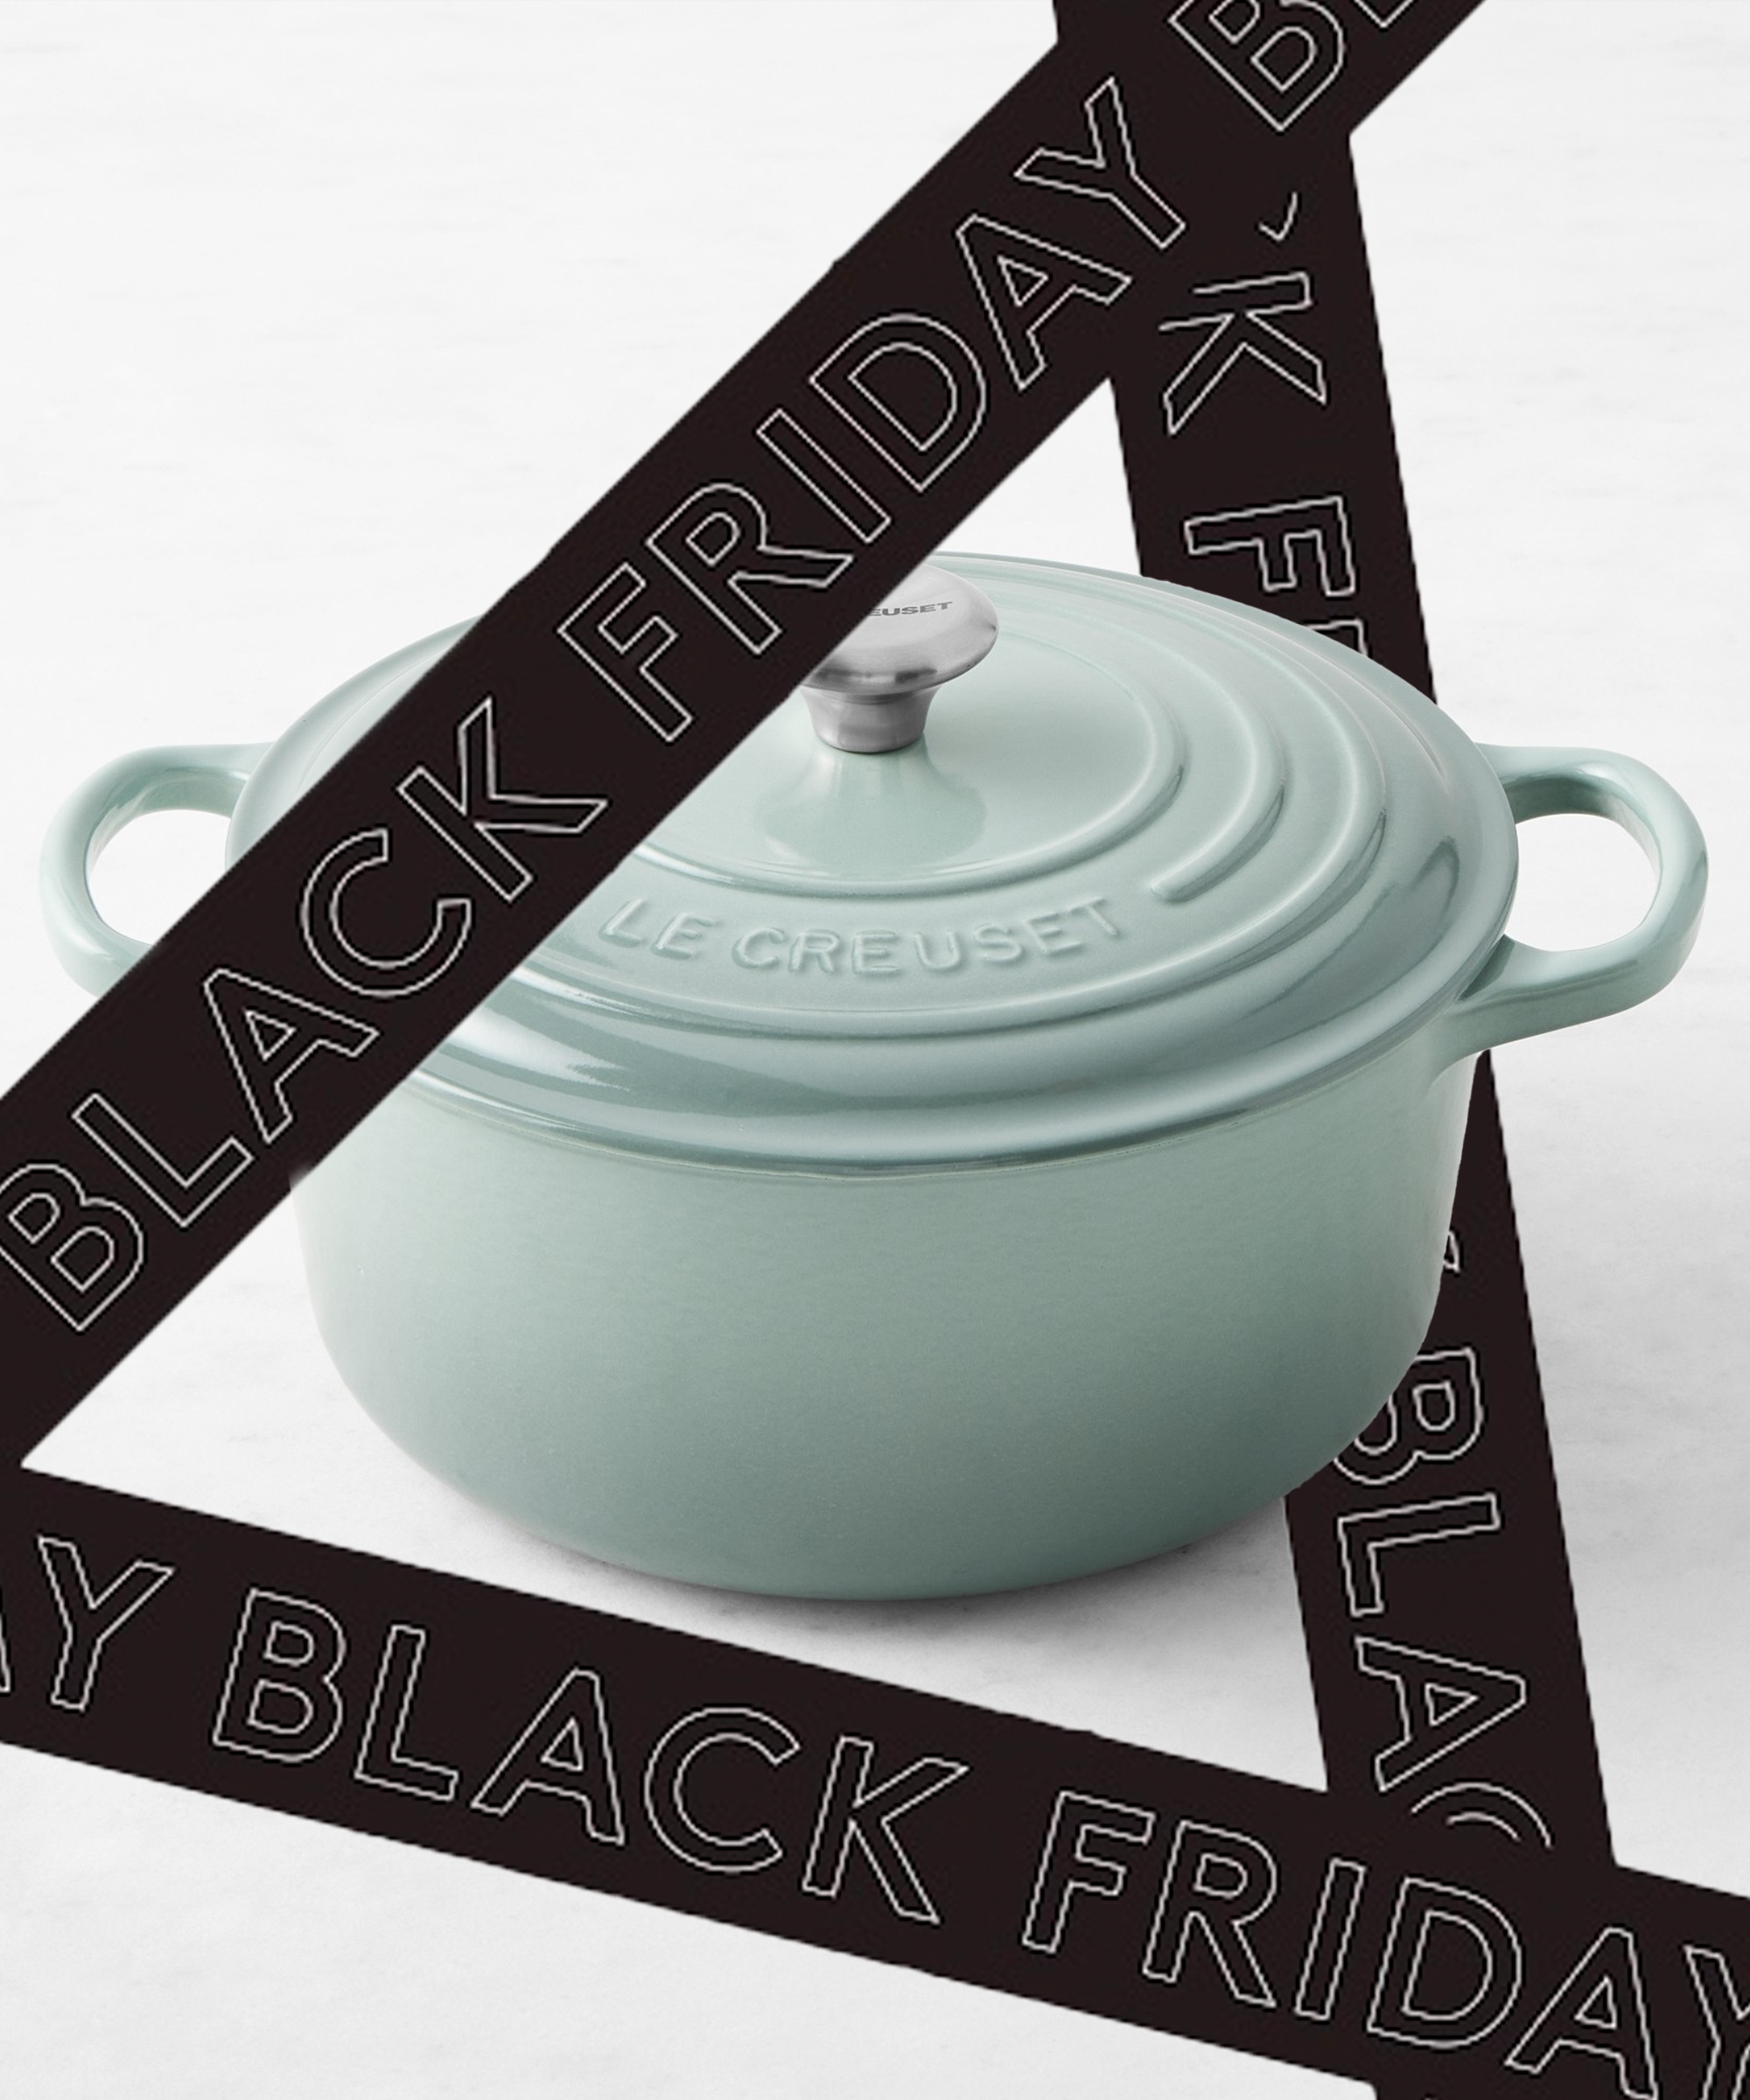 Le Creuset Dutch Ovens Are Up to 47% Off During Cyber Week